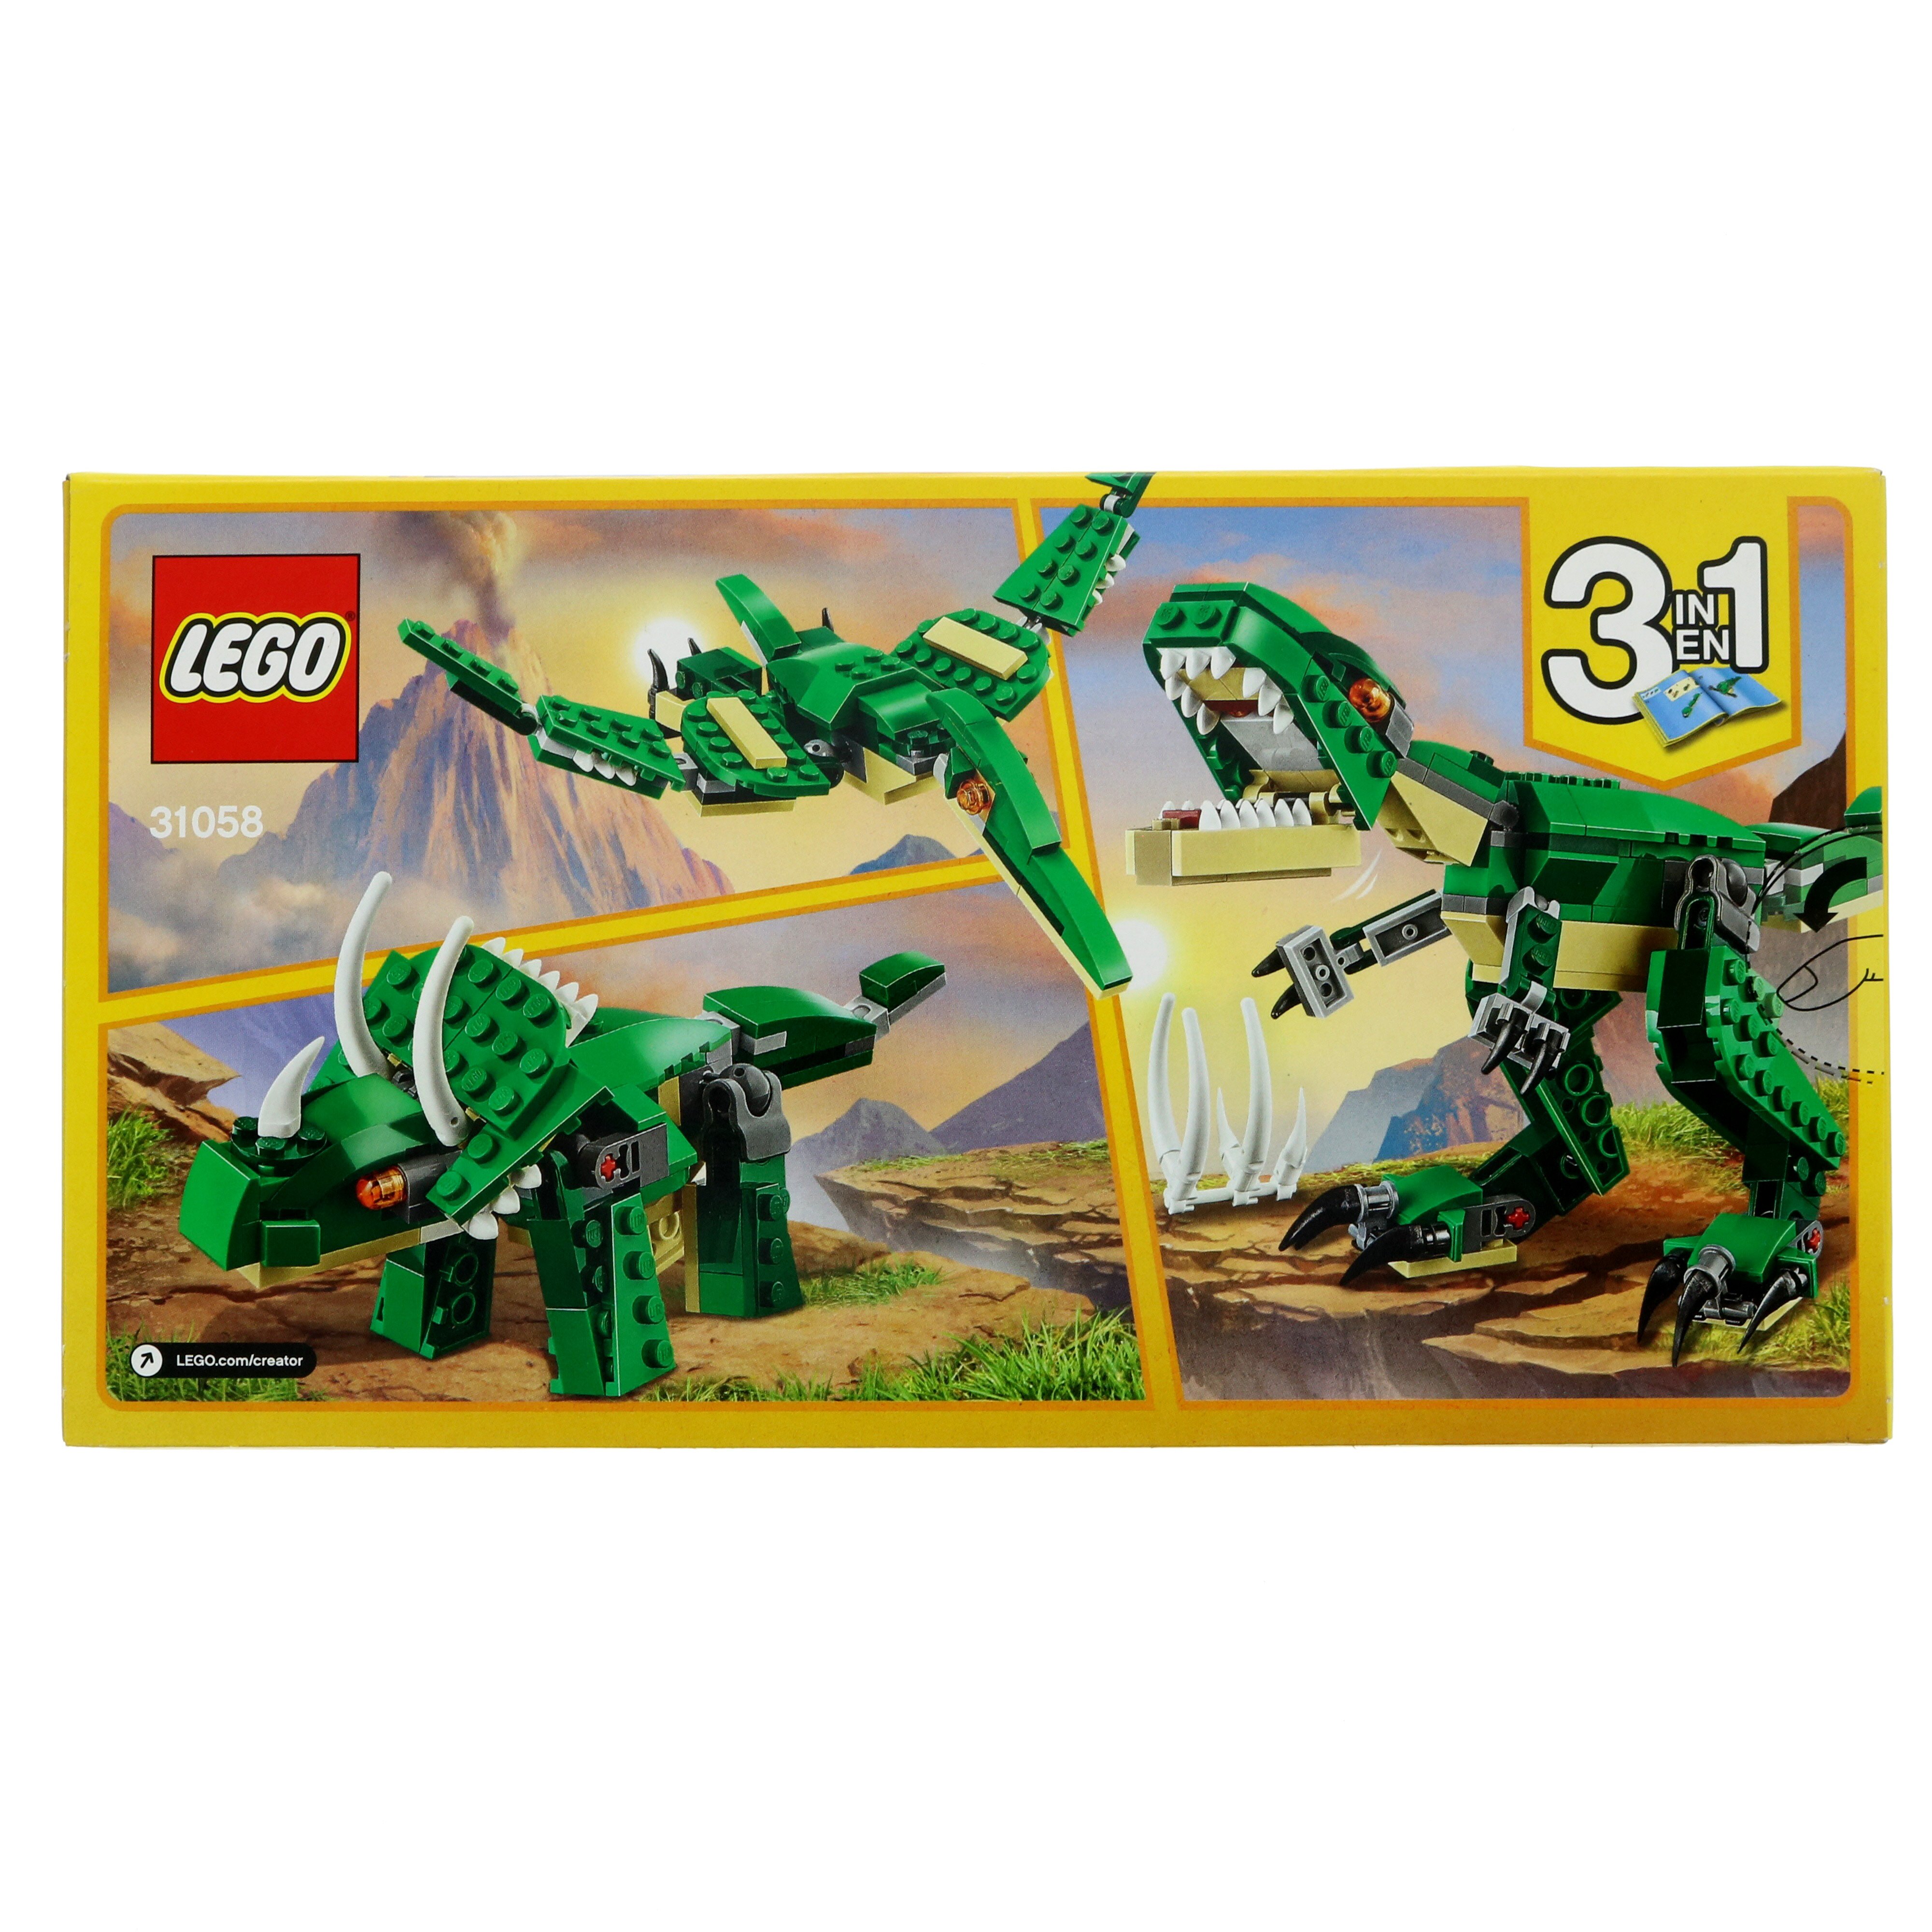 Lego Creator 3-In-1 Mighty Dinosaurs Playset - Shop Lego & Building Blocks  at H-E-B